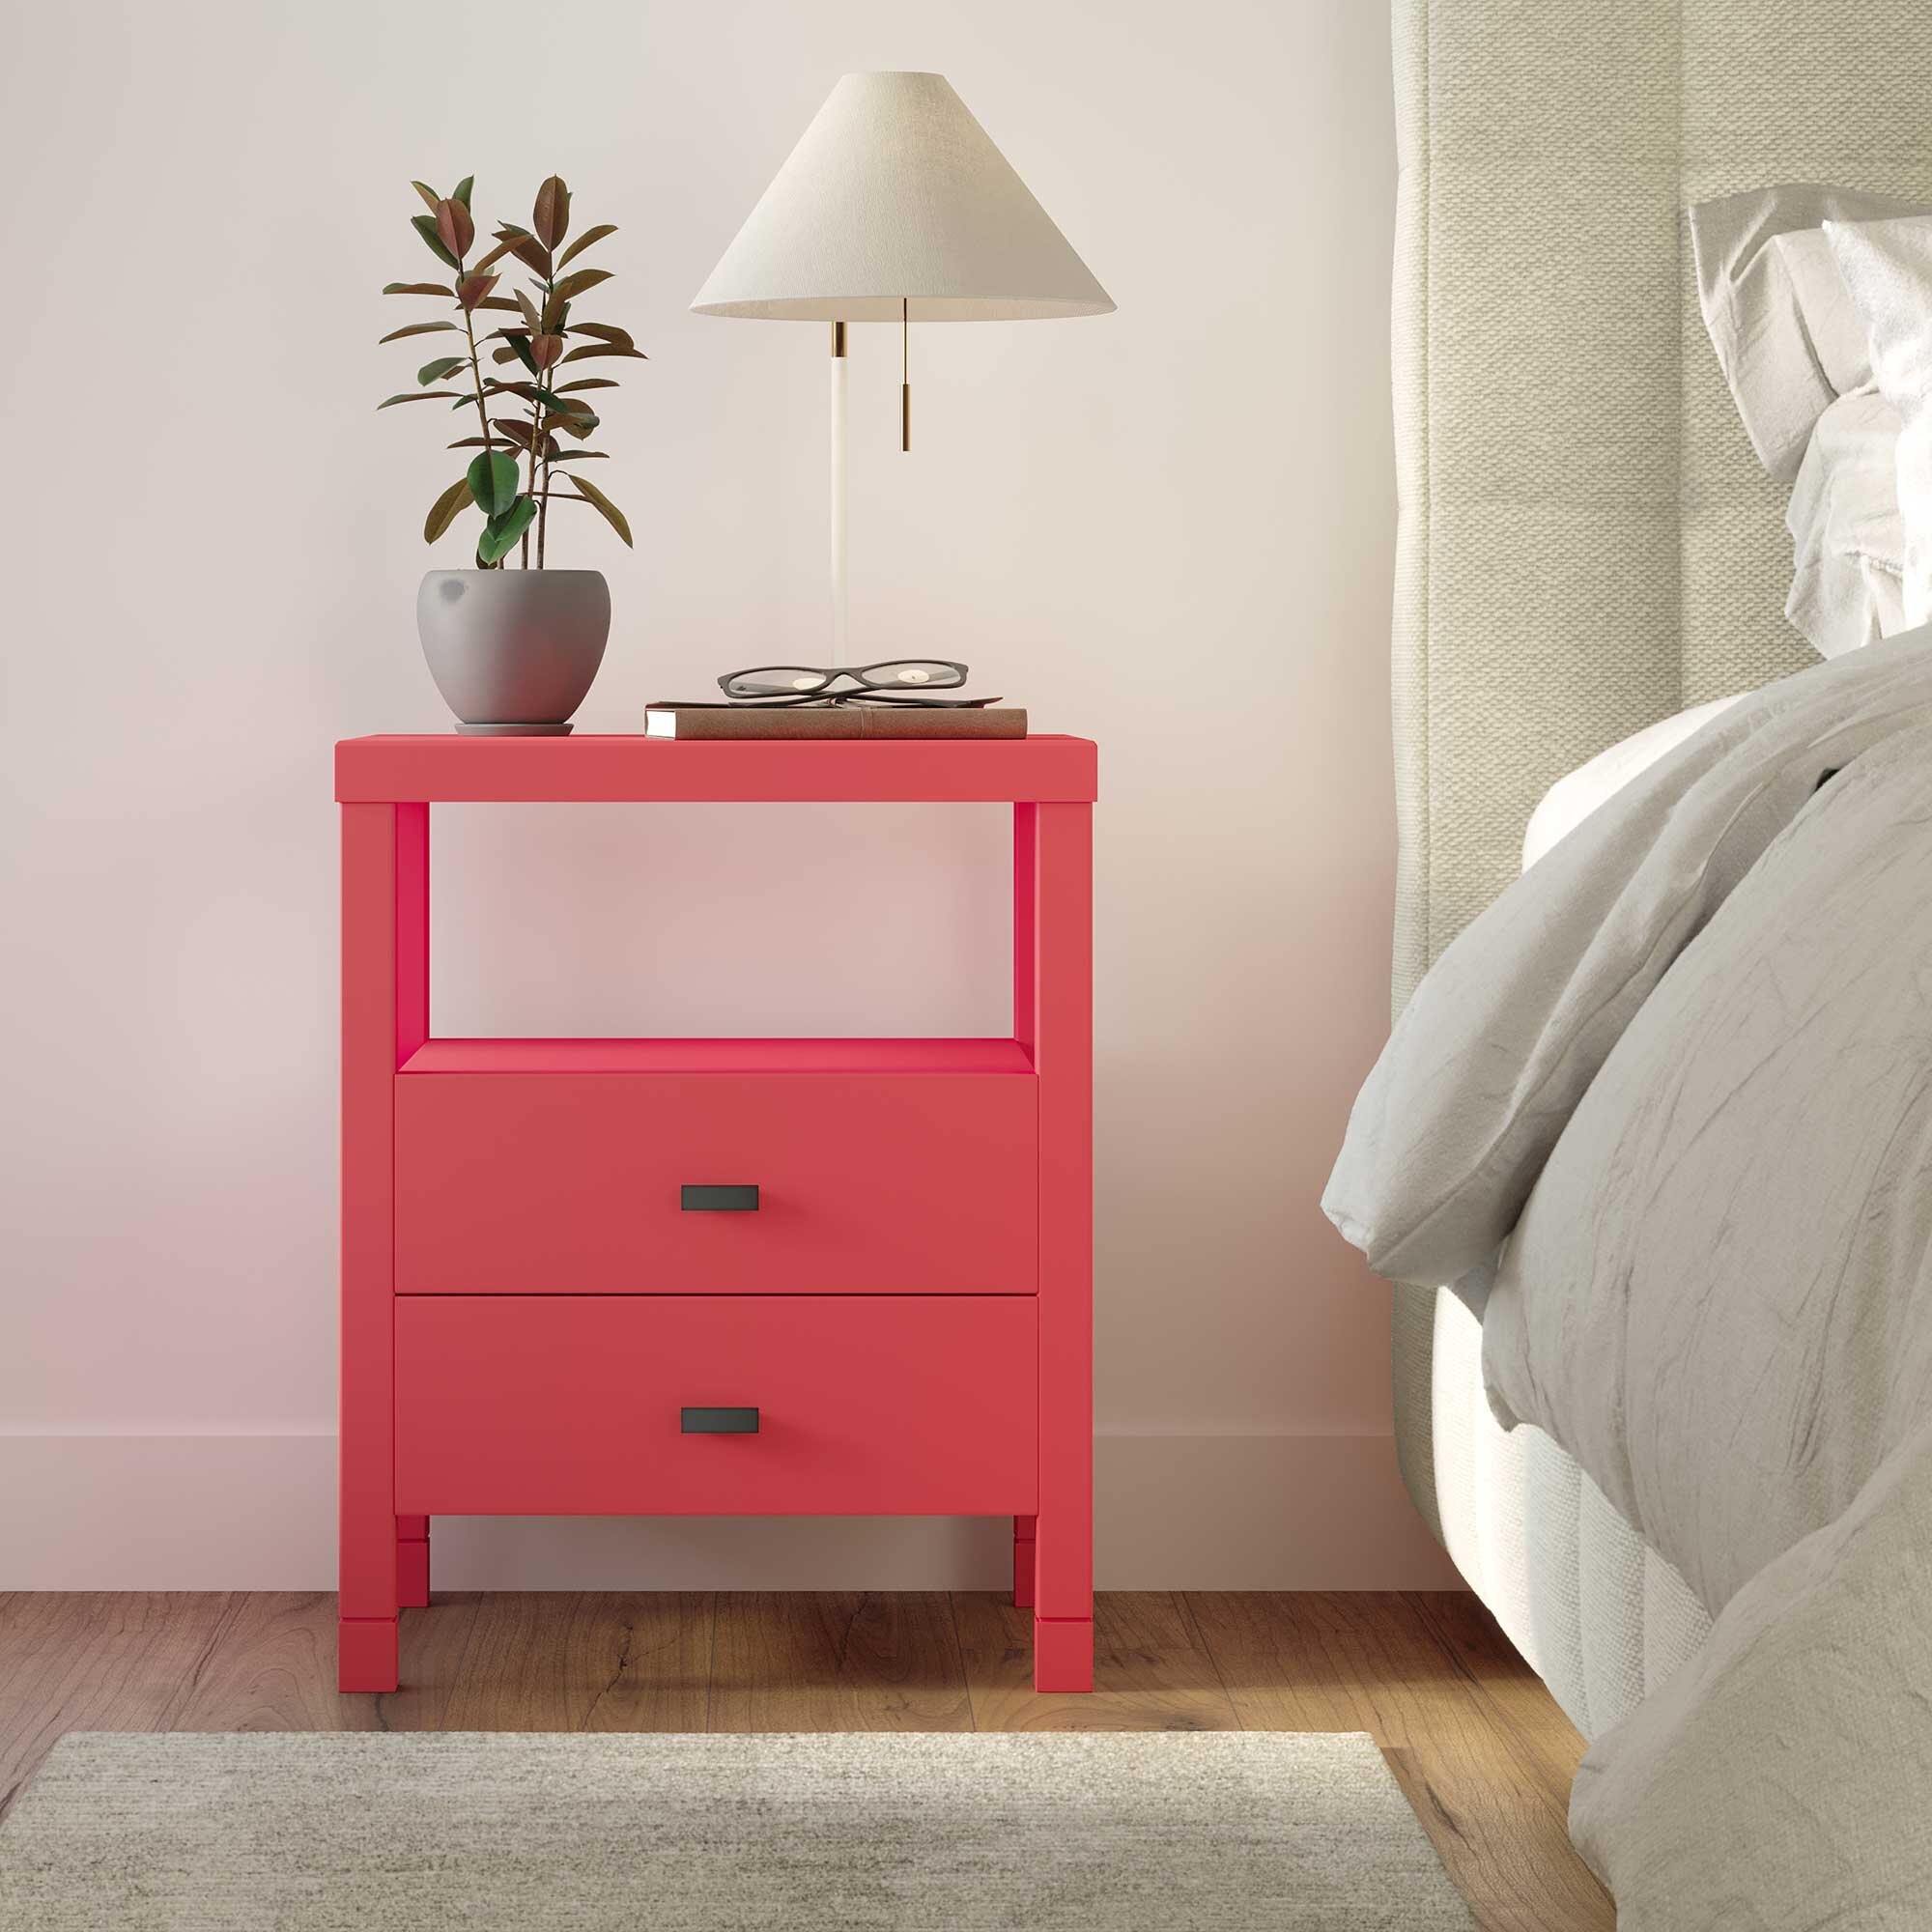 Details about   Campaign Nightstand Table Red Finish One Drawer Home Furniture 